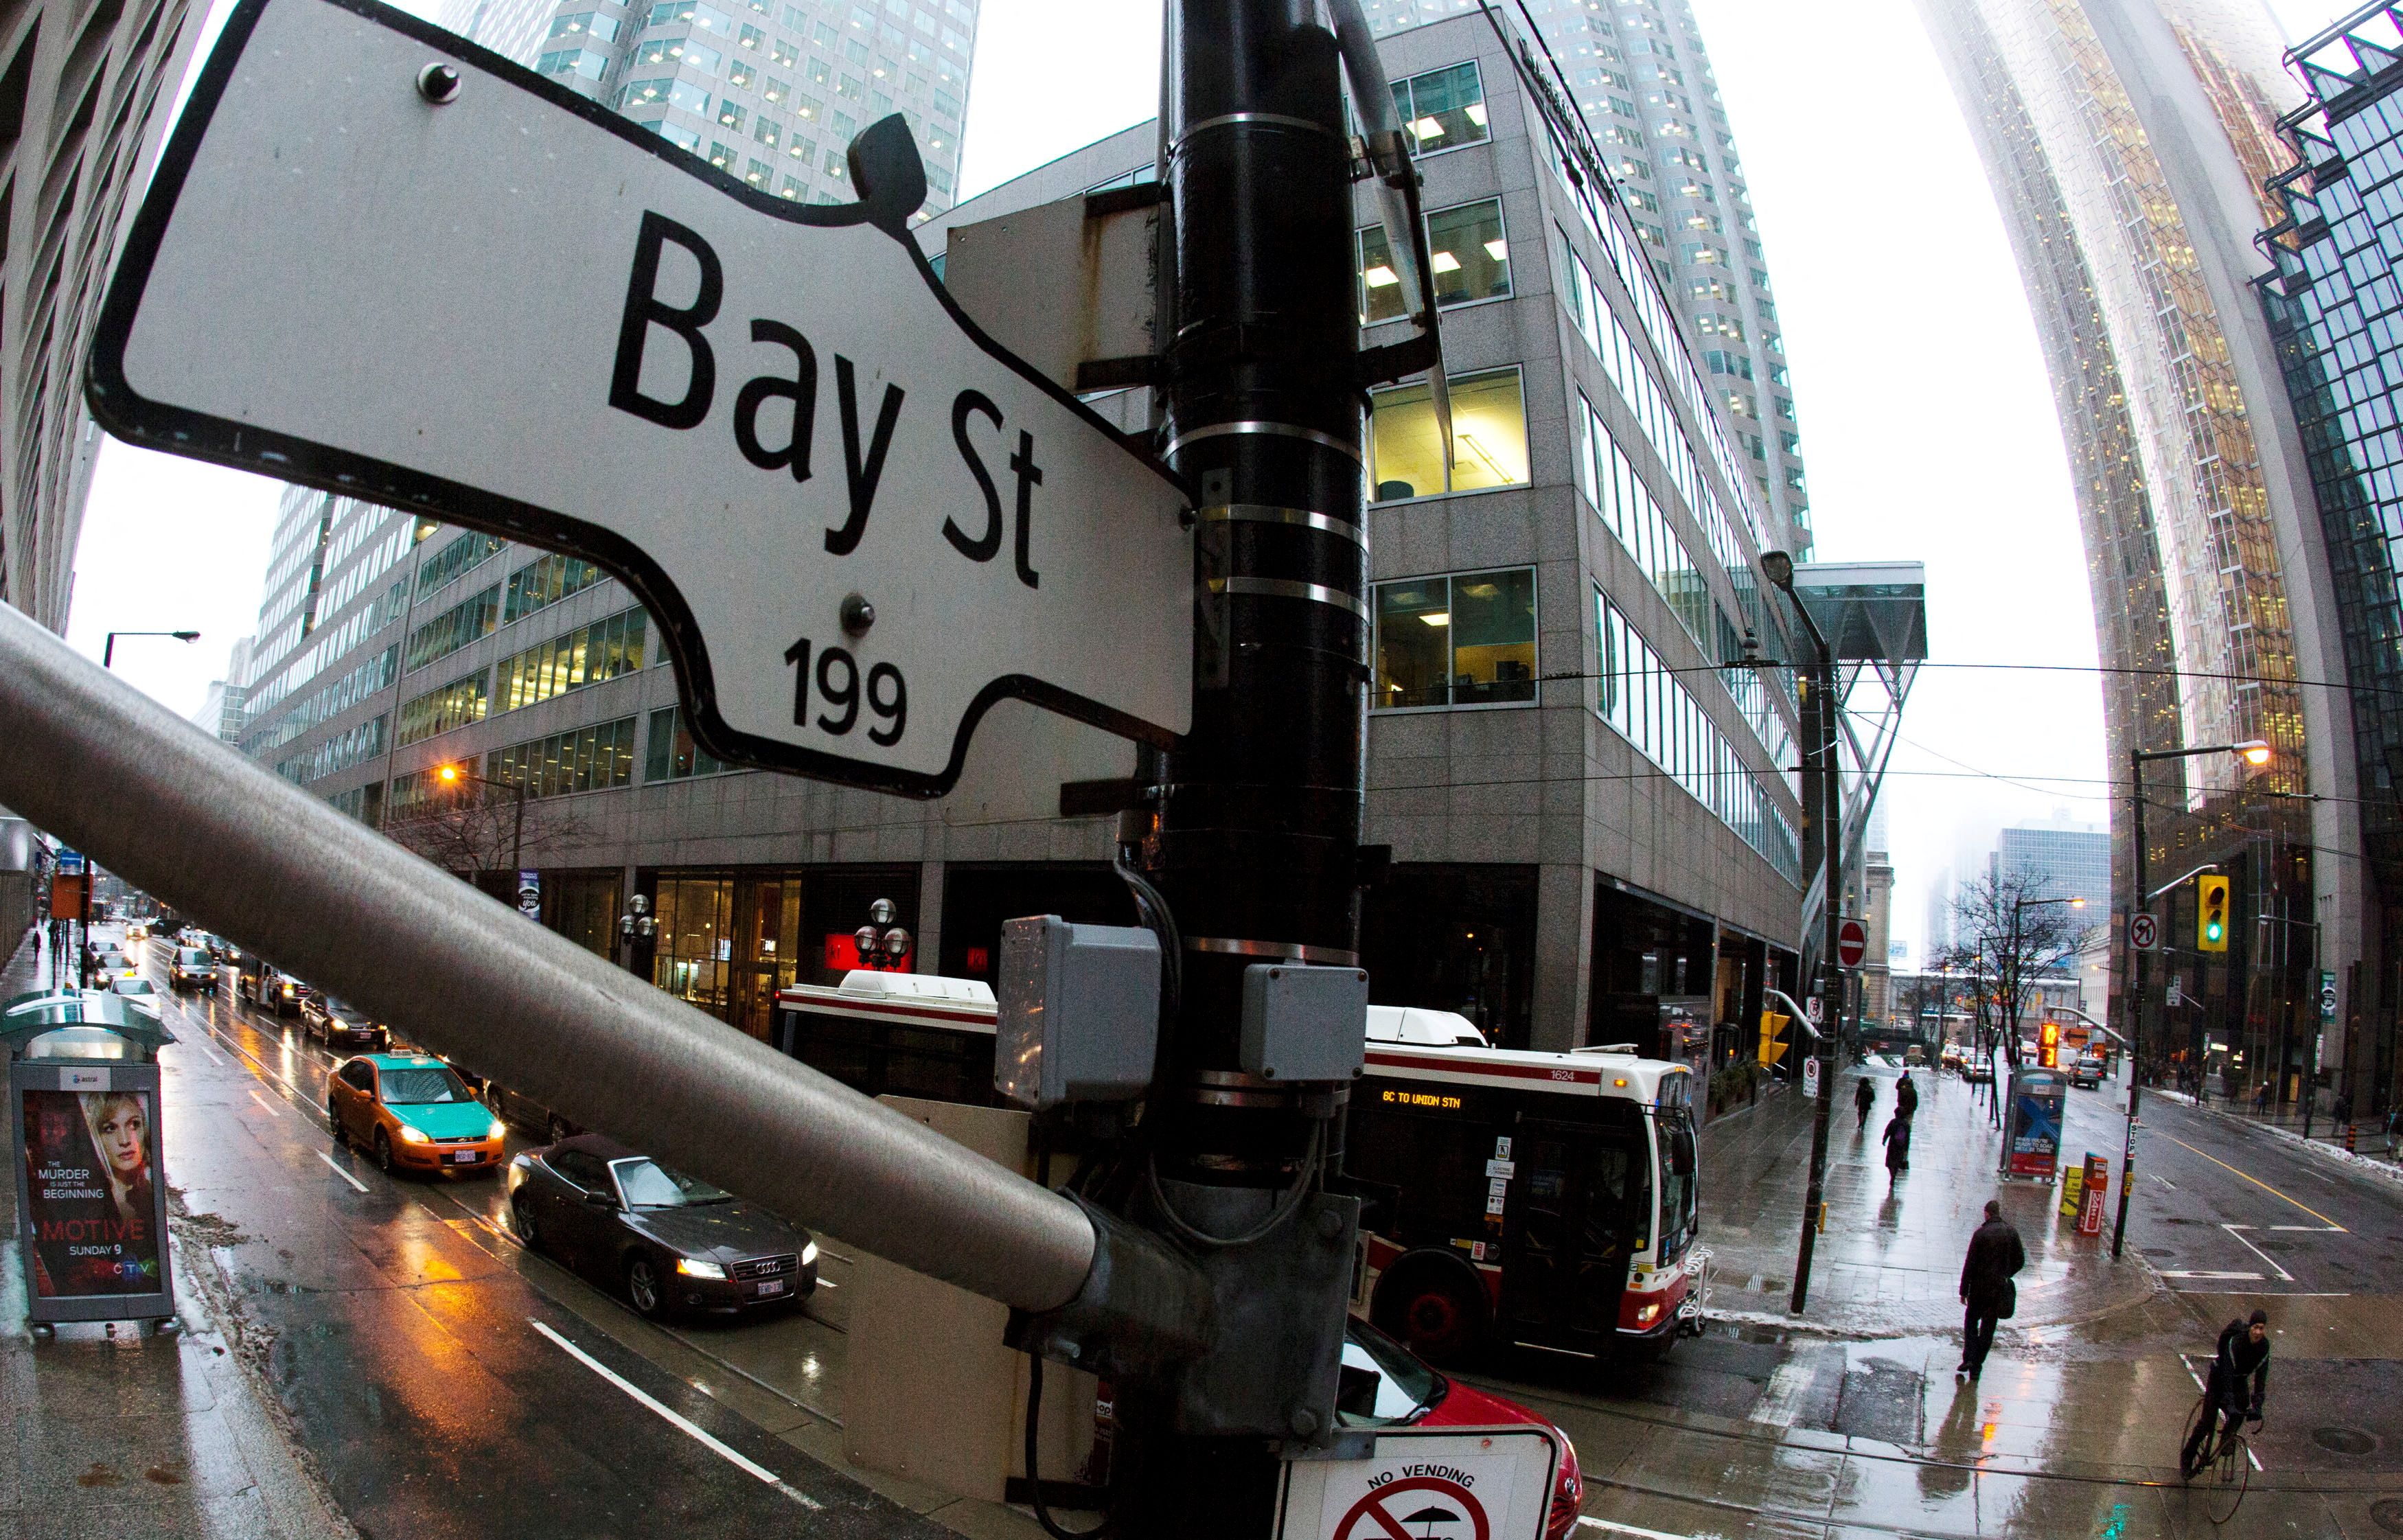 A Bay Street sign, the main street in the financial district is seen in Toronto